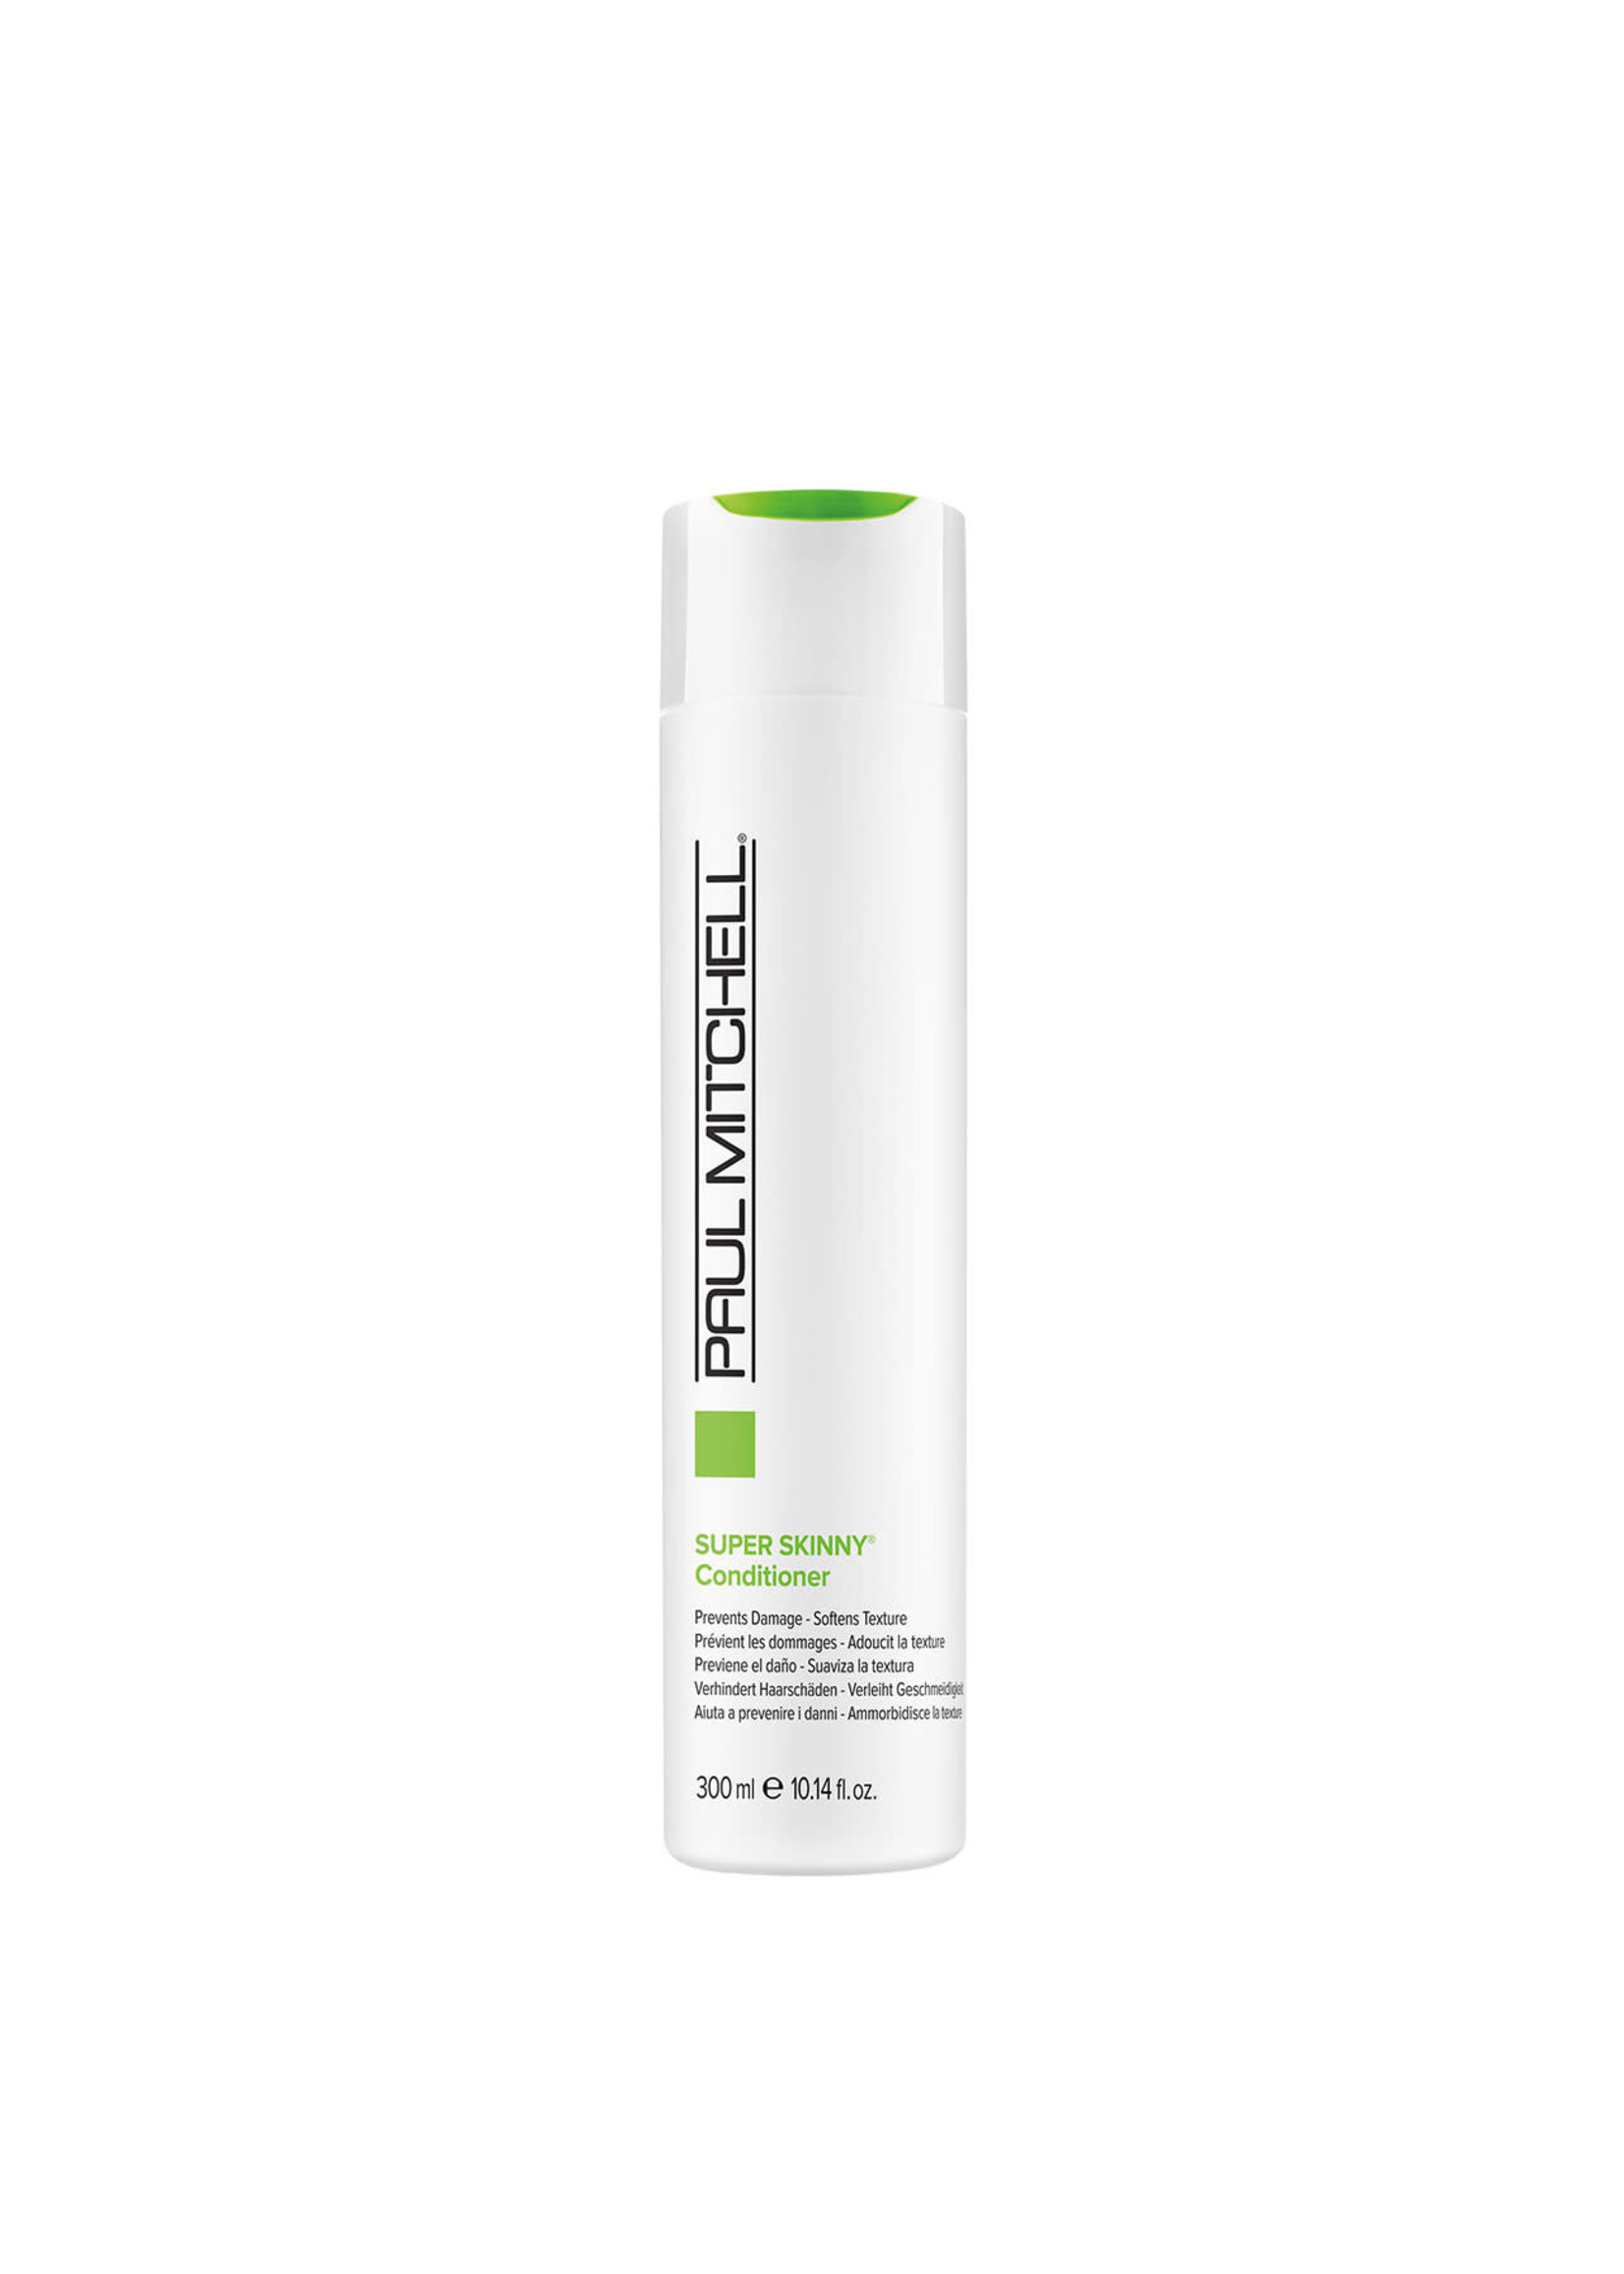 Paul Mitchell Paul Mitchell Super Skinny Daily Conditioner 300ml